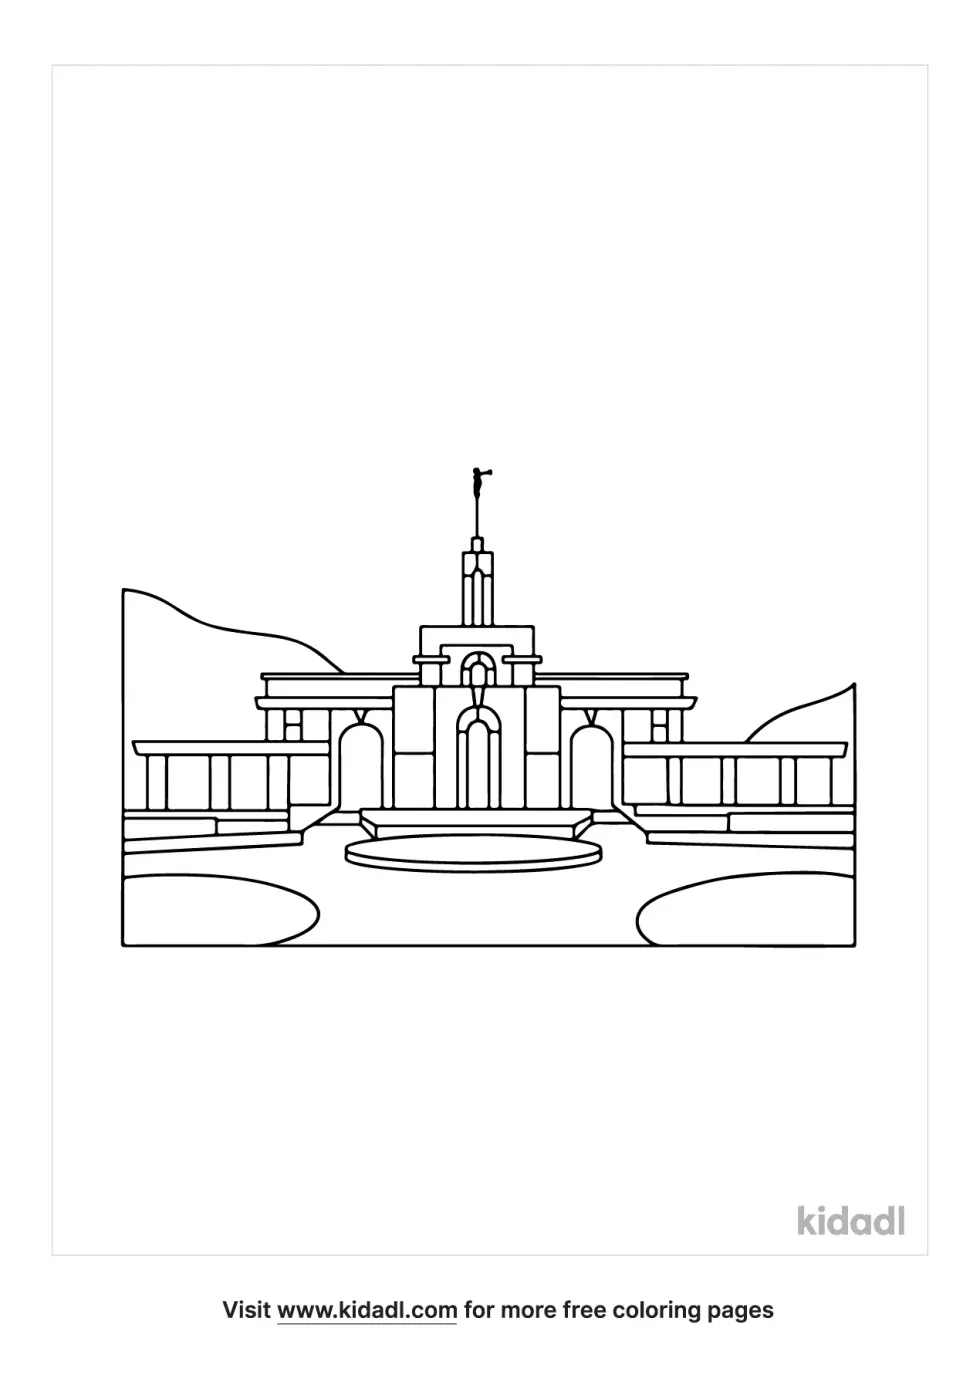 Fort Collins LDS Temple Coloring Page